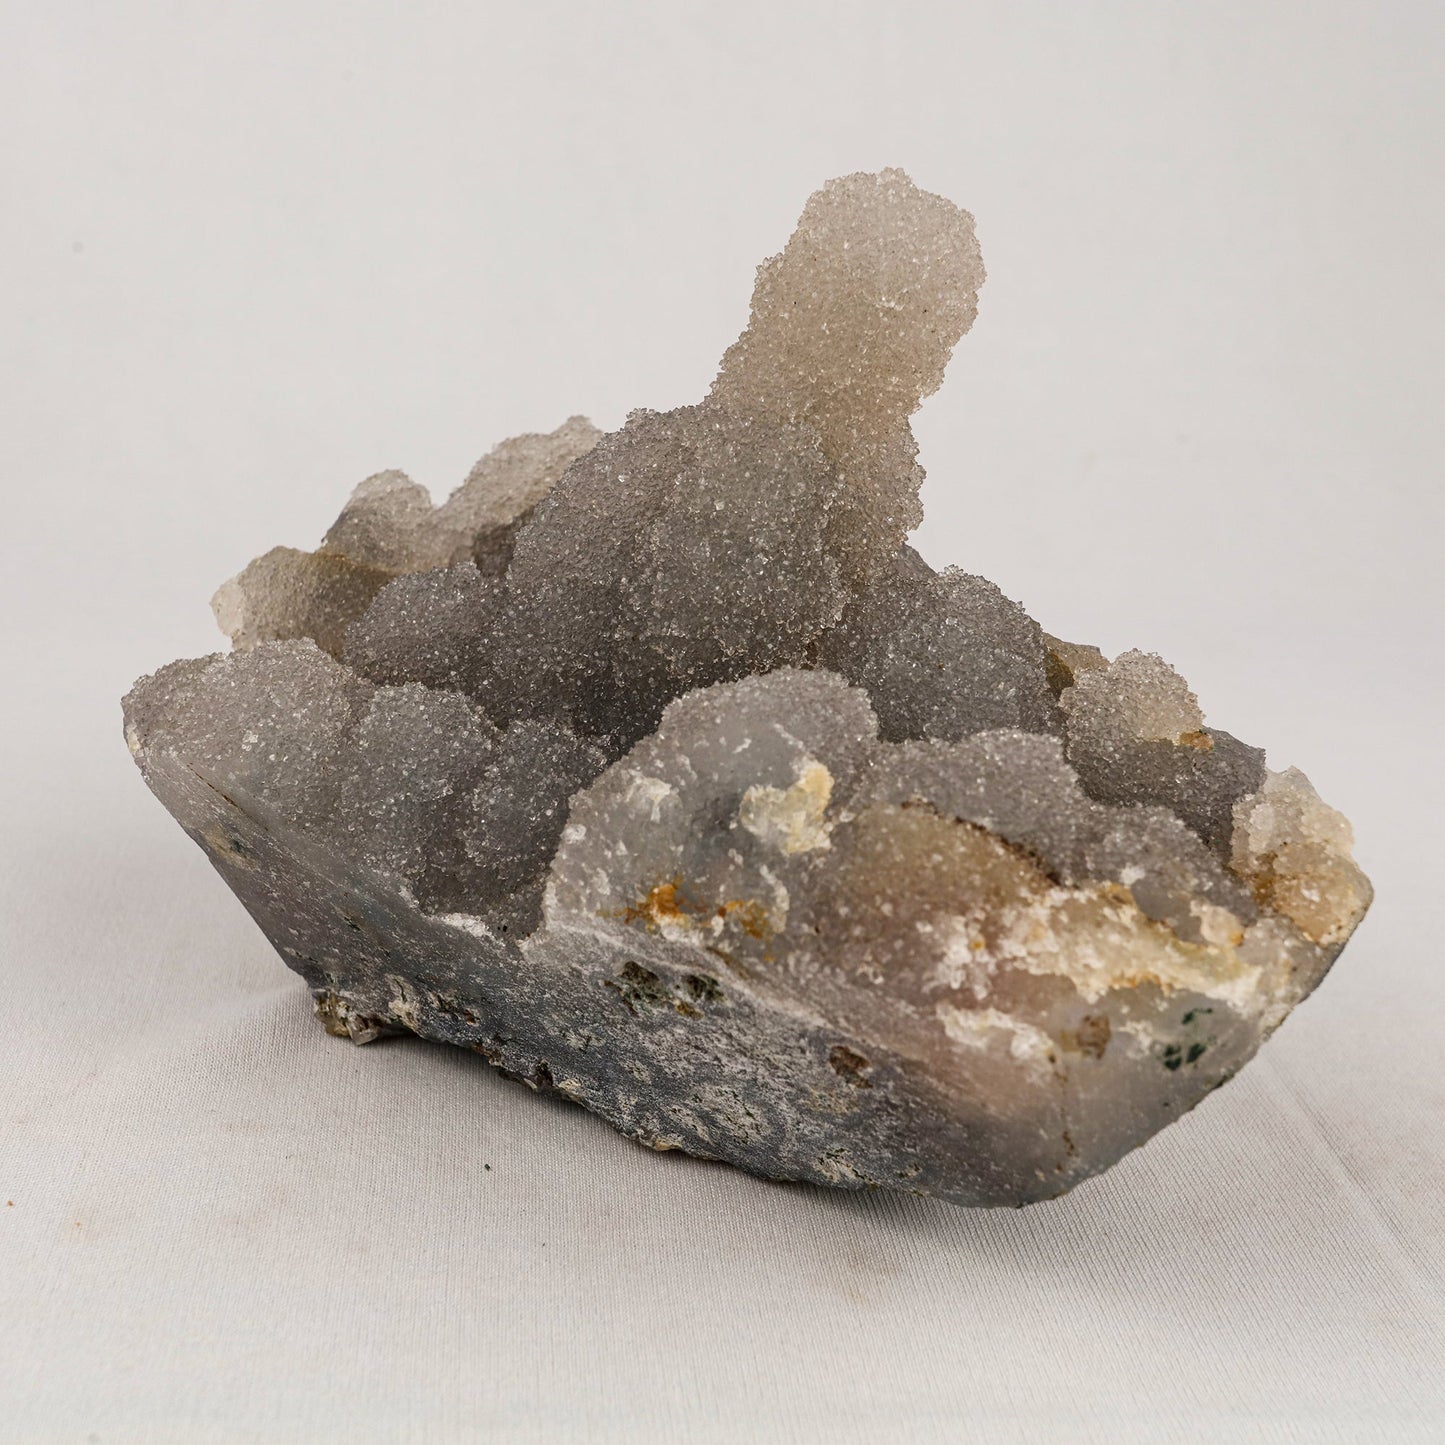 Chalcedony Stalactite Coral Formation Natural Mineral Specimen # B 5532 Chalcedony Superb Minerals 